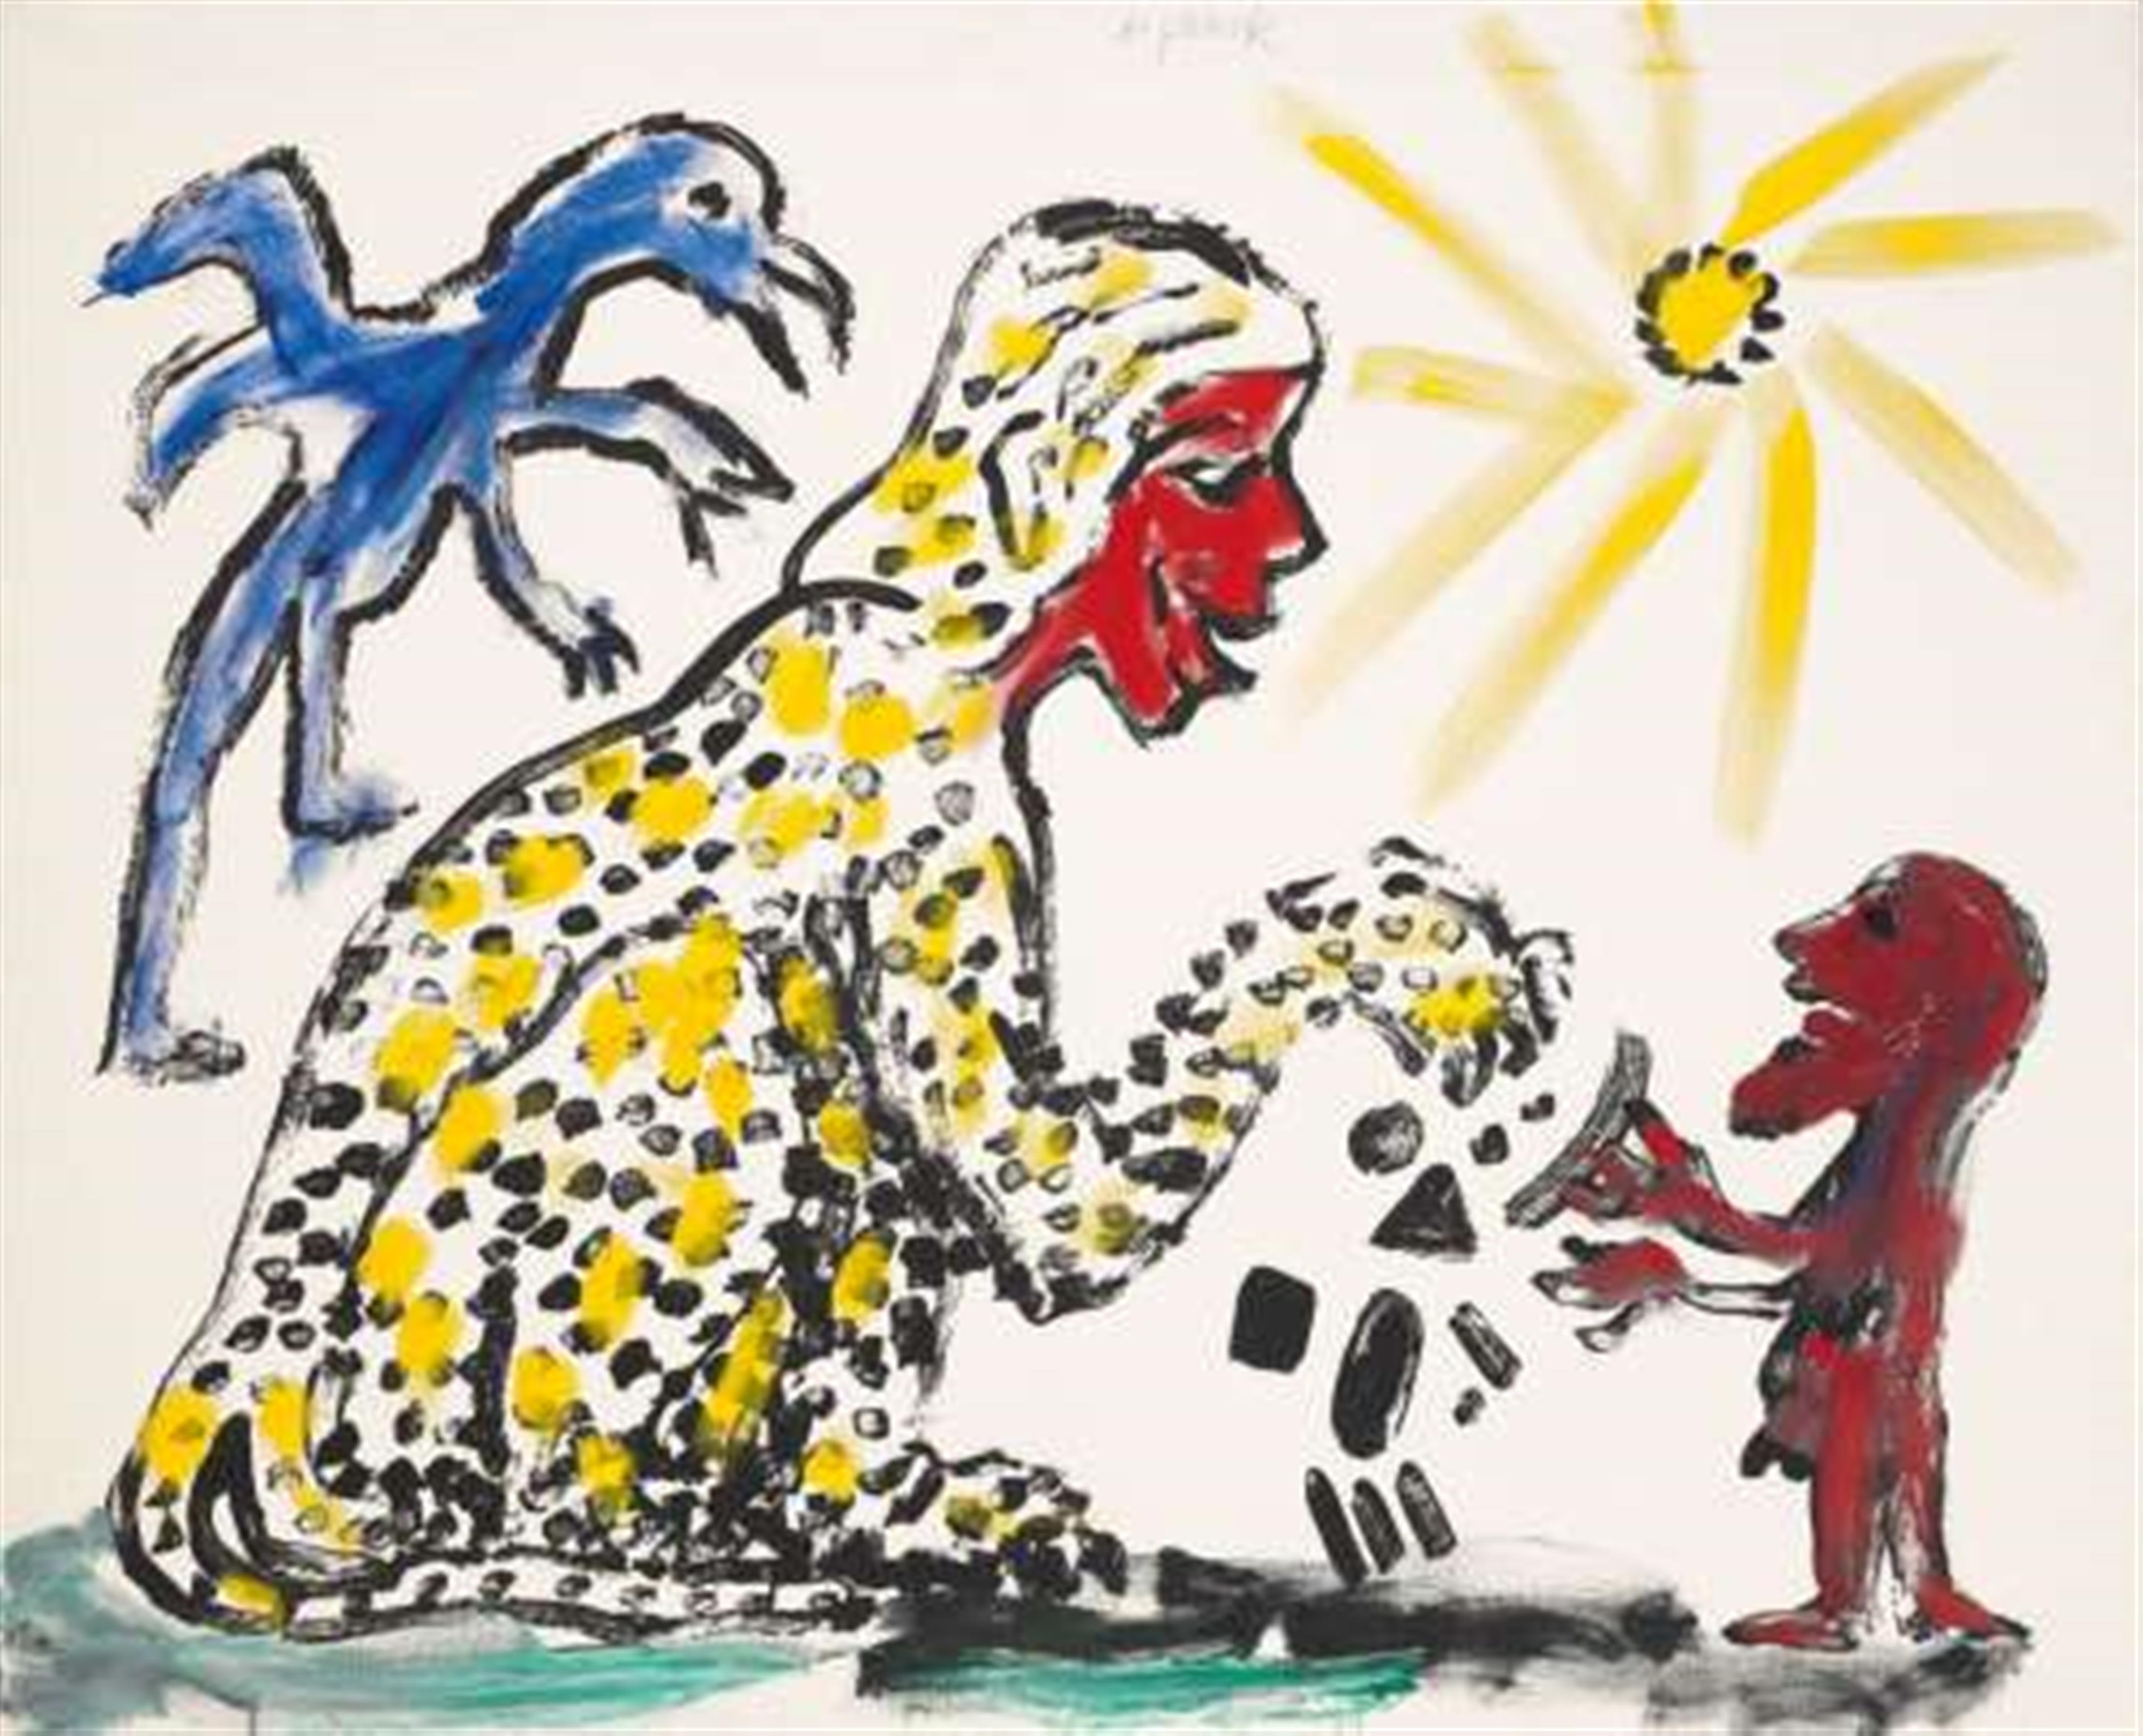 A.R. Penck - Folge und Konsequenz / Result and Consequence - image-2